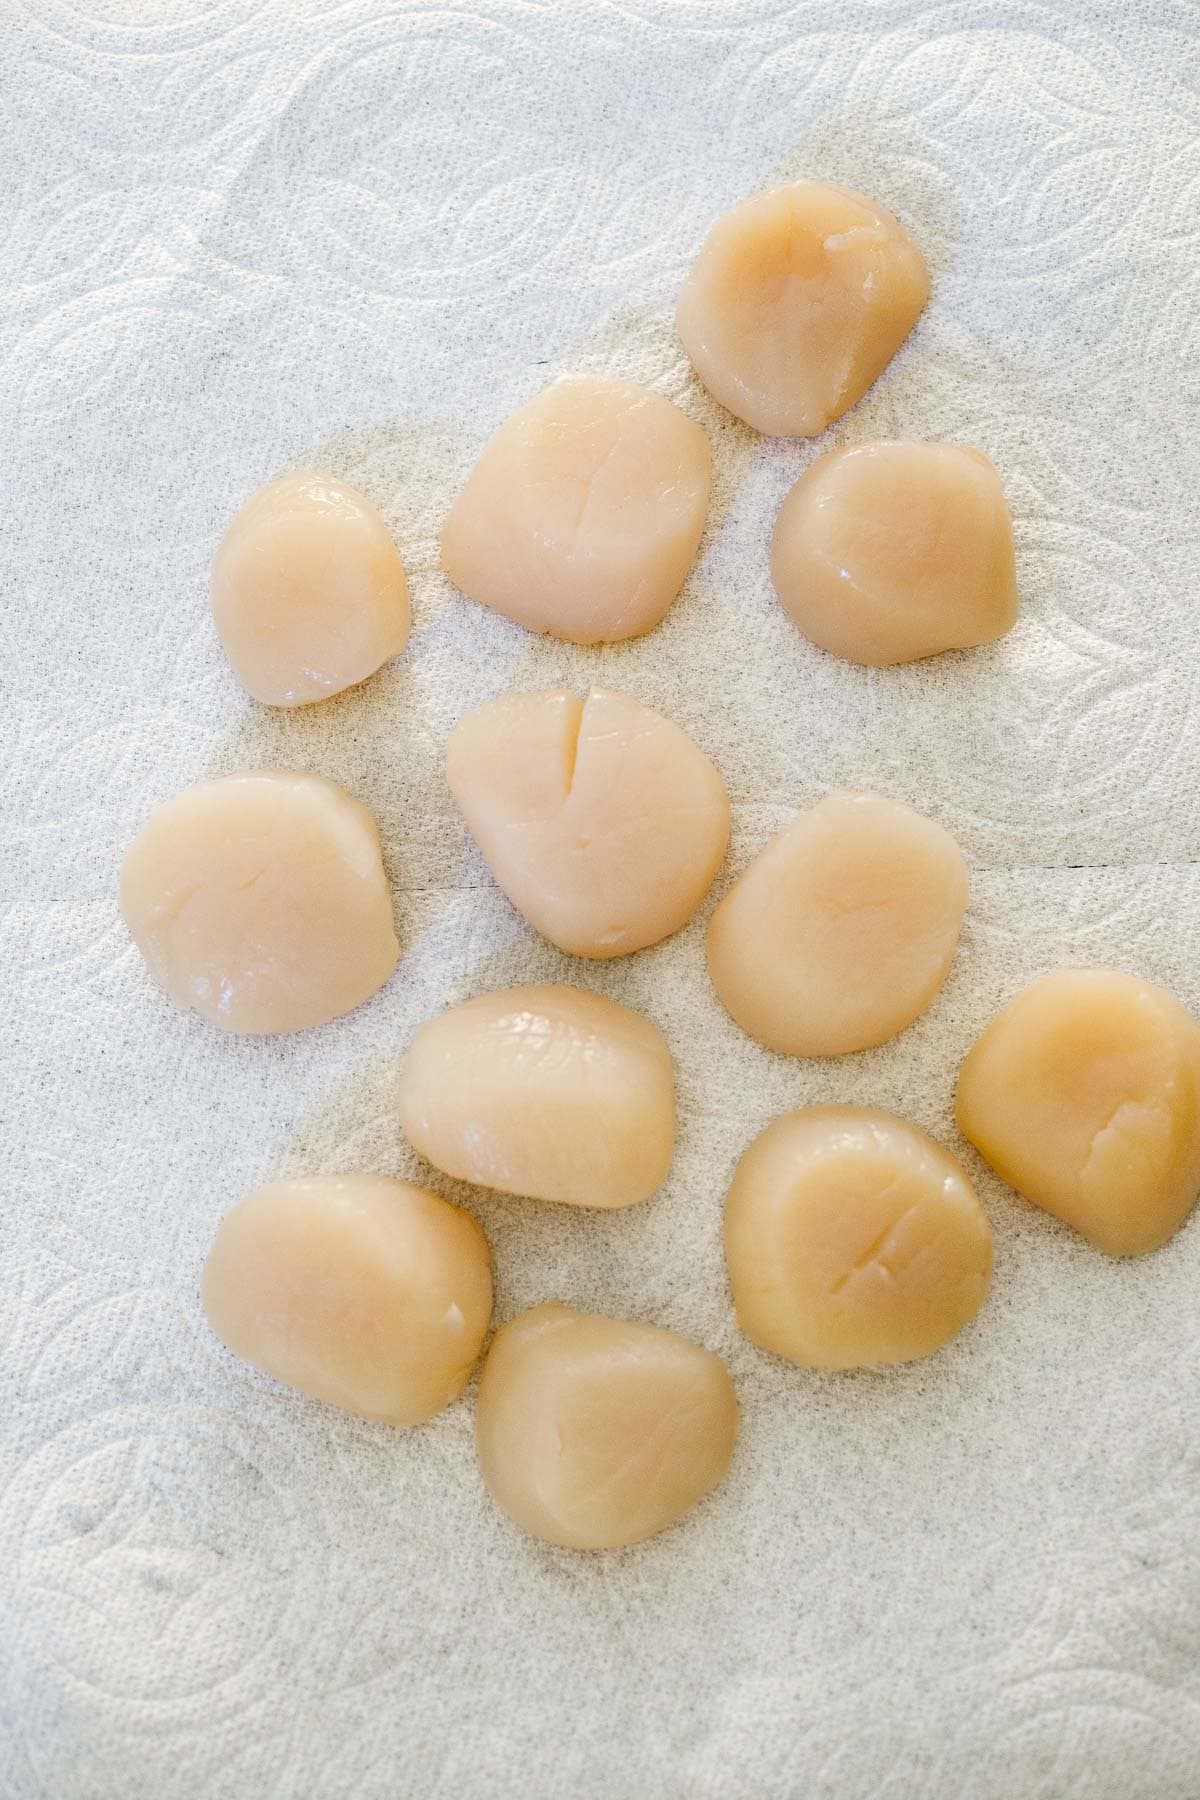 dry scallops laid out on paper towel.